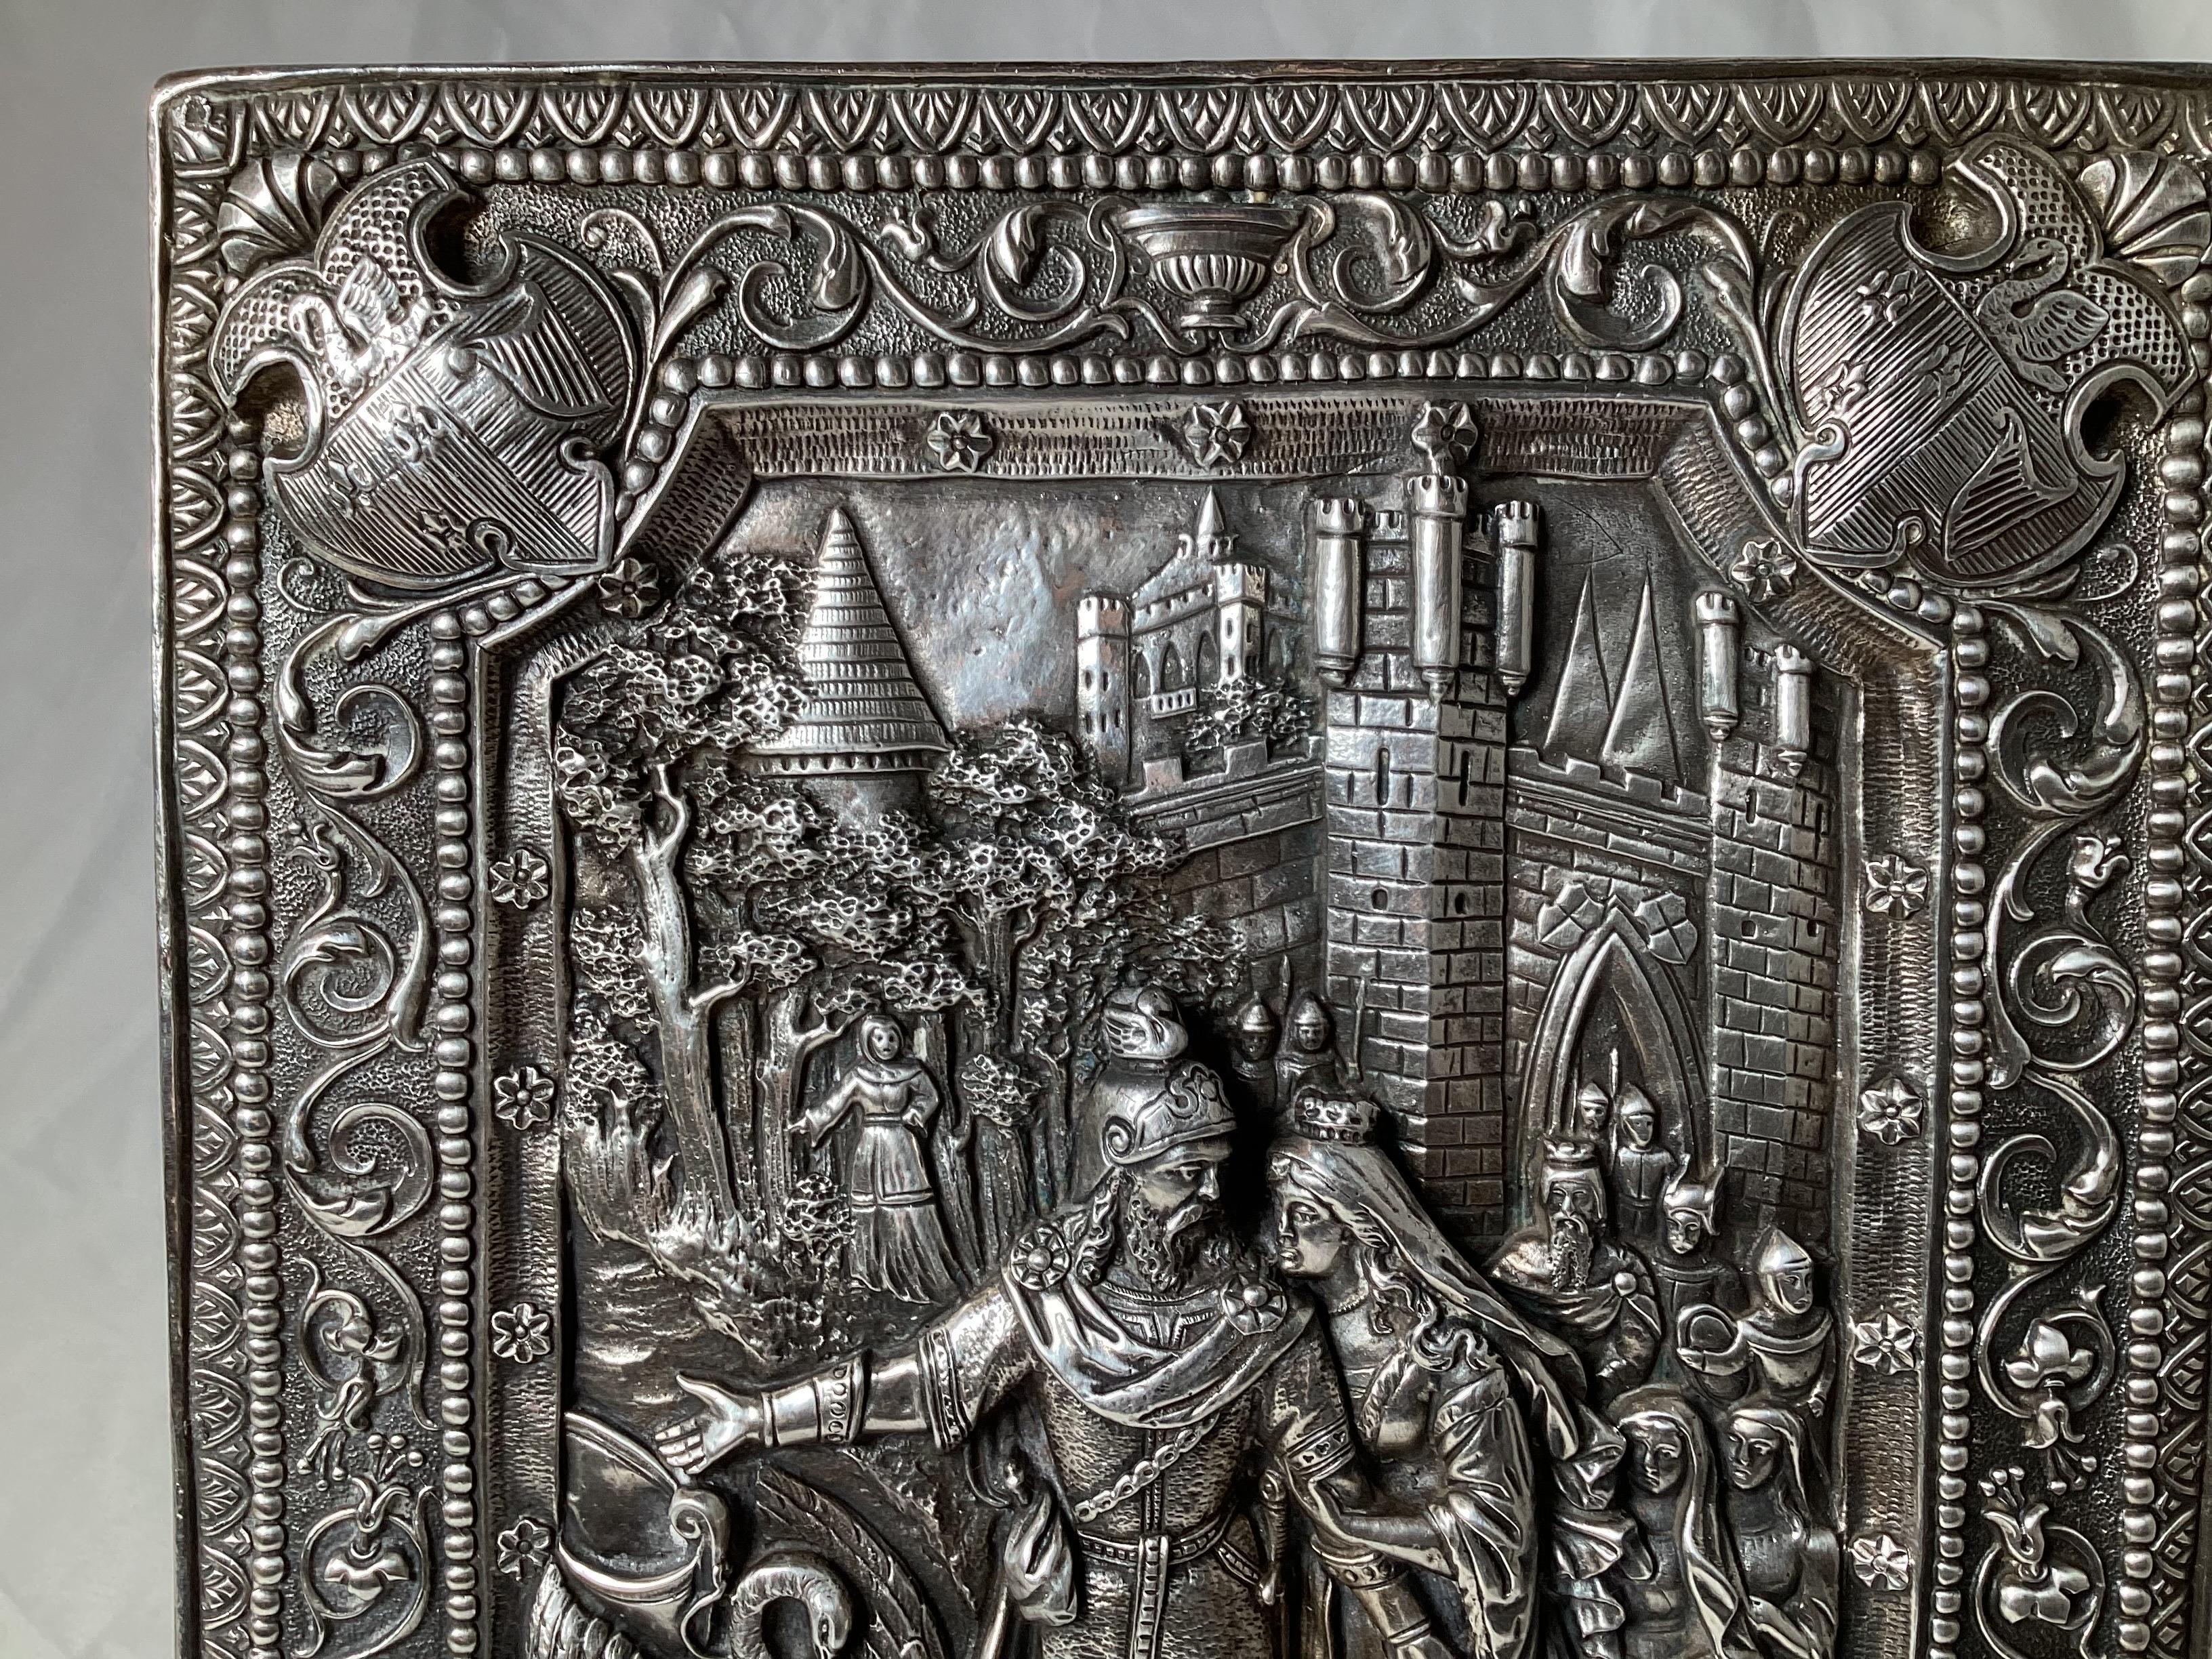 A finely detailed sterling silver repousse plaque with knight, castle, coat of arms swan by Henryk Winograd. Measures: 10.25 high, 7.75 wide.

Henryk Winograd was one of the world's greatest 20th Century masters of traditional silversmithing